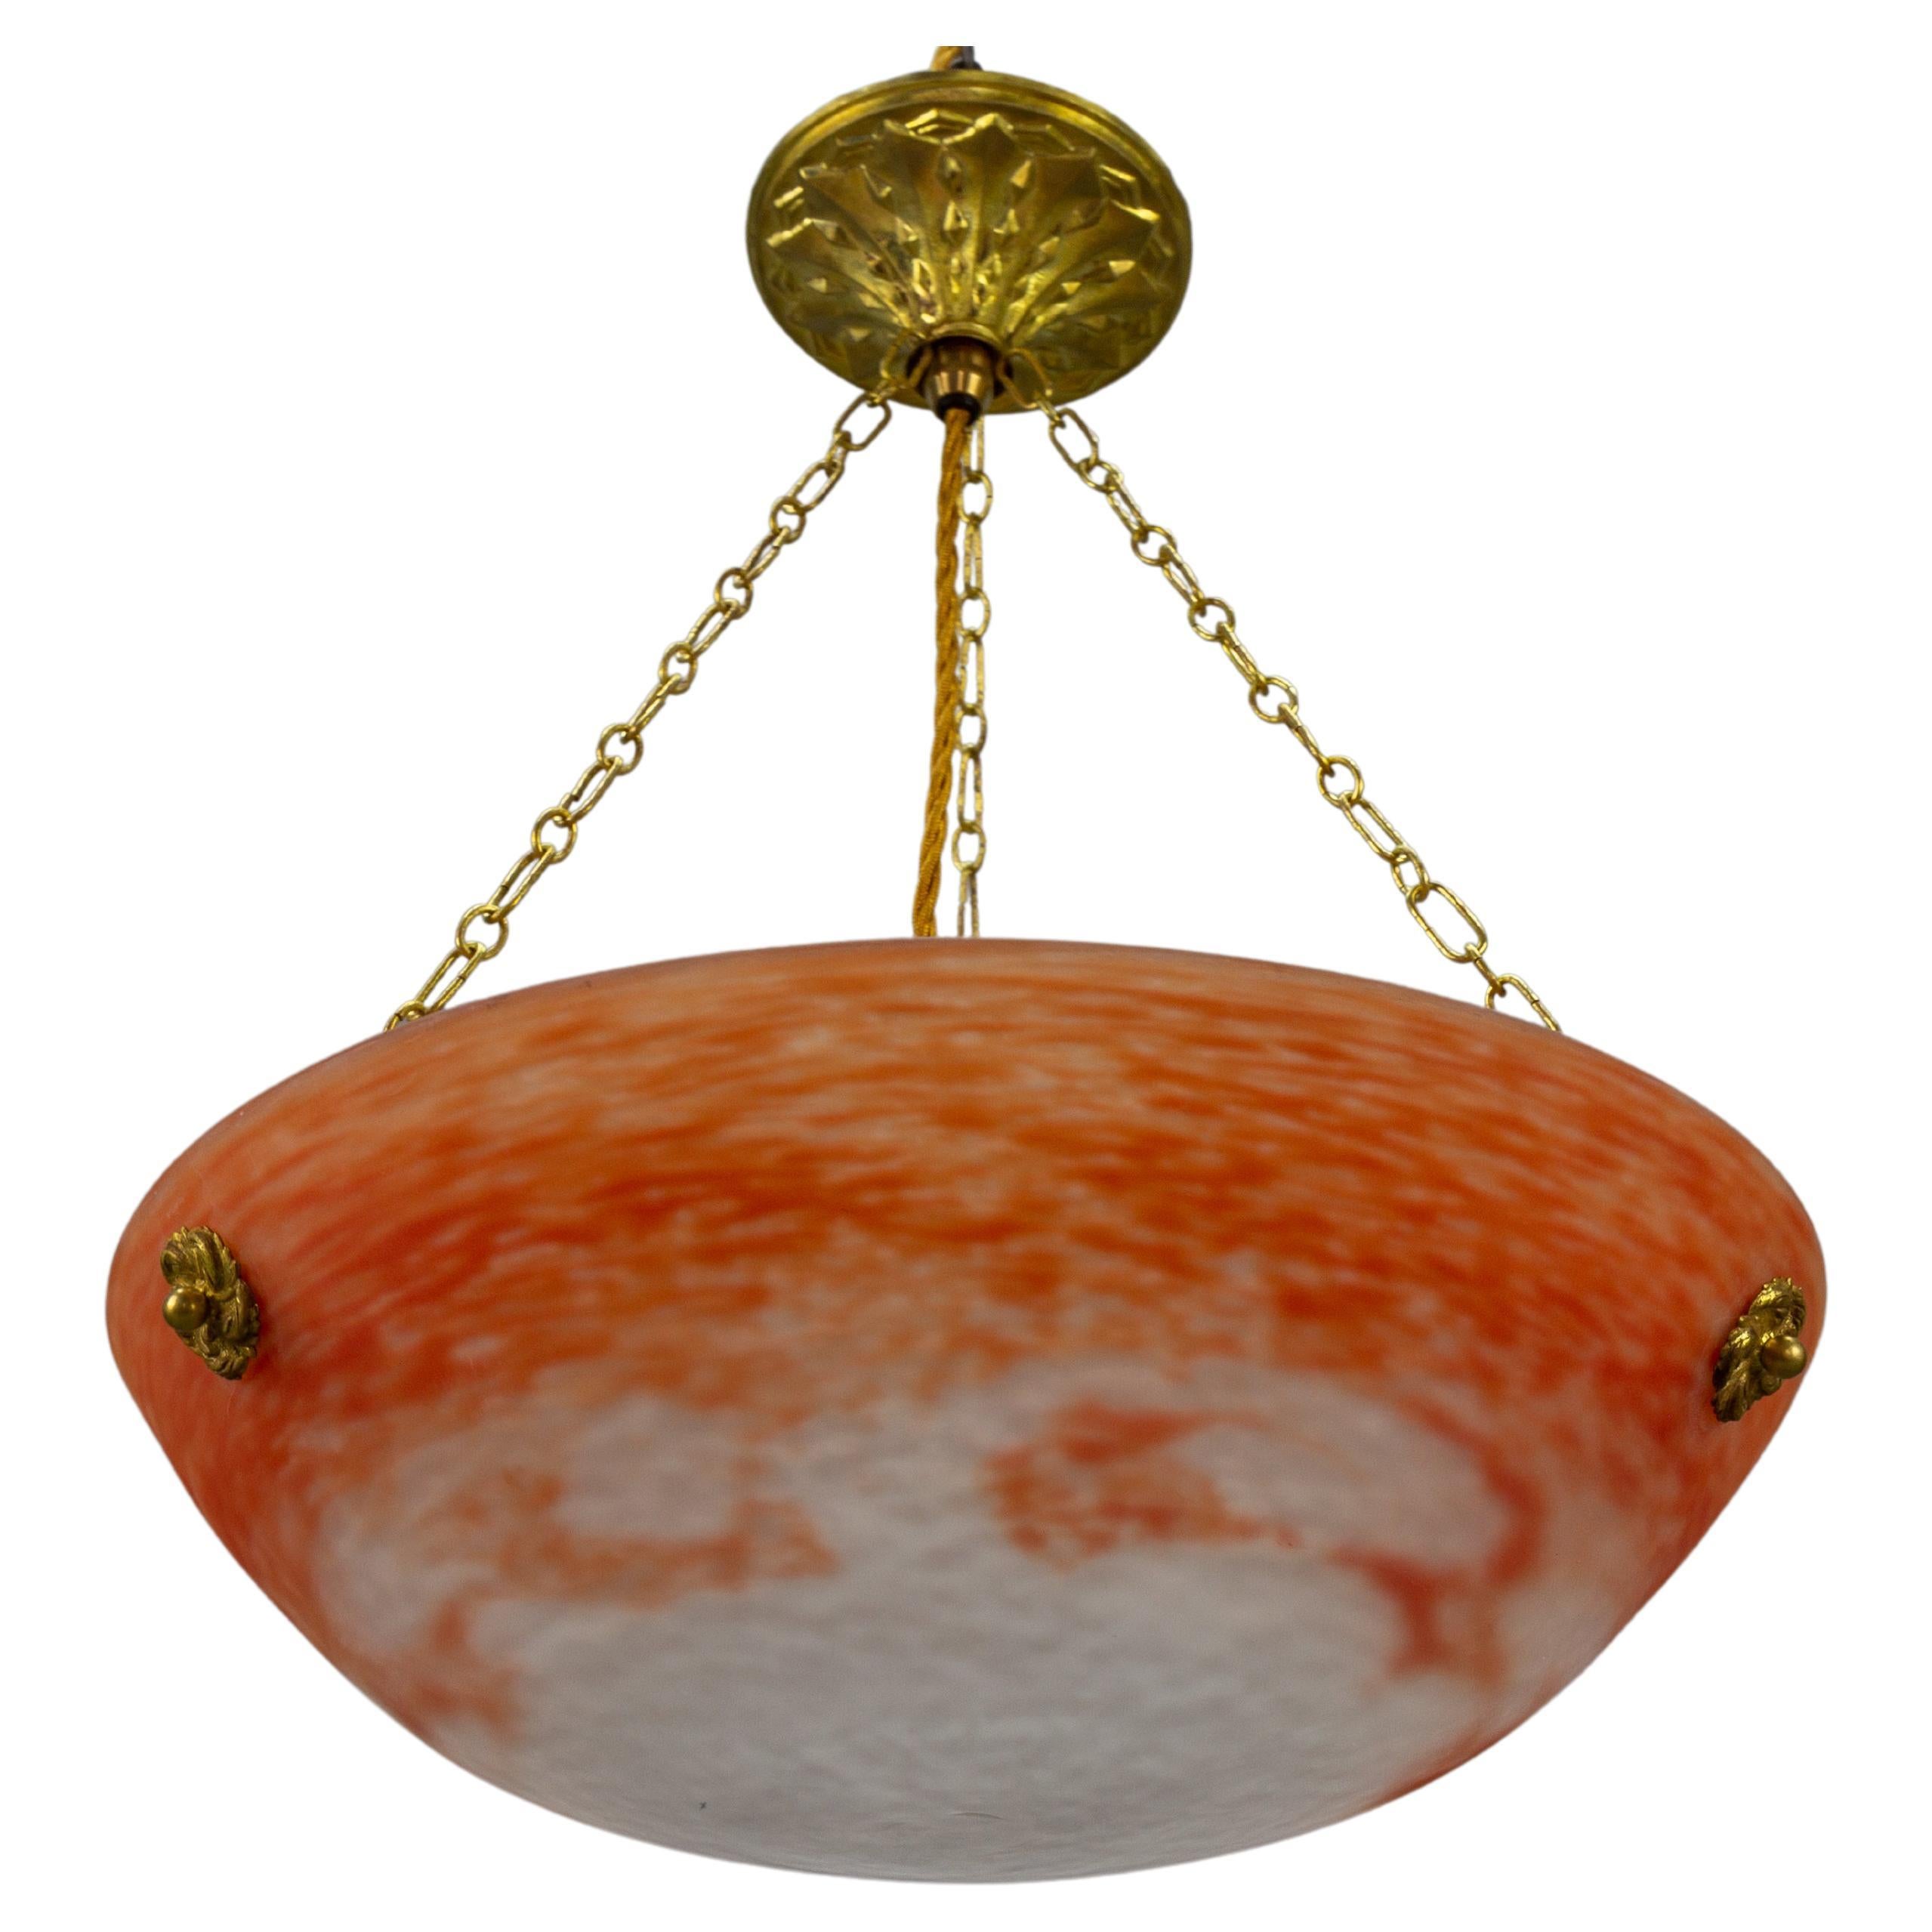 This adorable French Art Nouveau period pendant chandelier features a mottled “Pâte de Verre” art glass bowl in orange and white color, signed ”Noverdy France” by Jean Noverdy. The pendant light fixture has three chains attached to the glass bowl